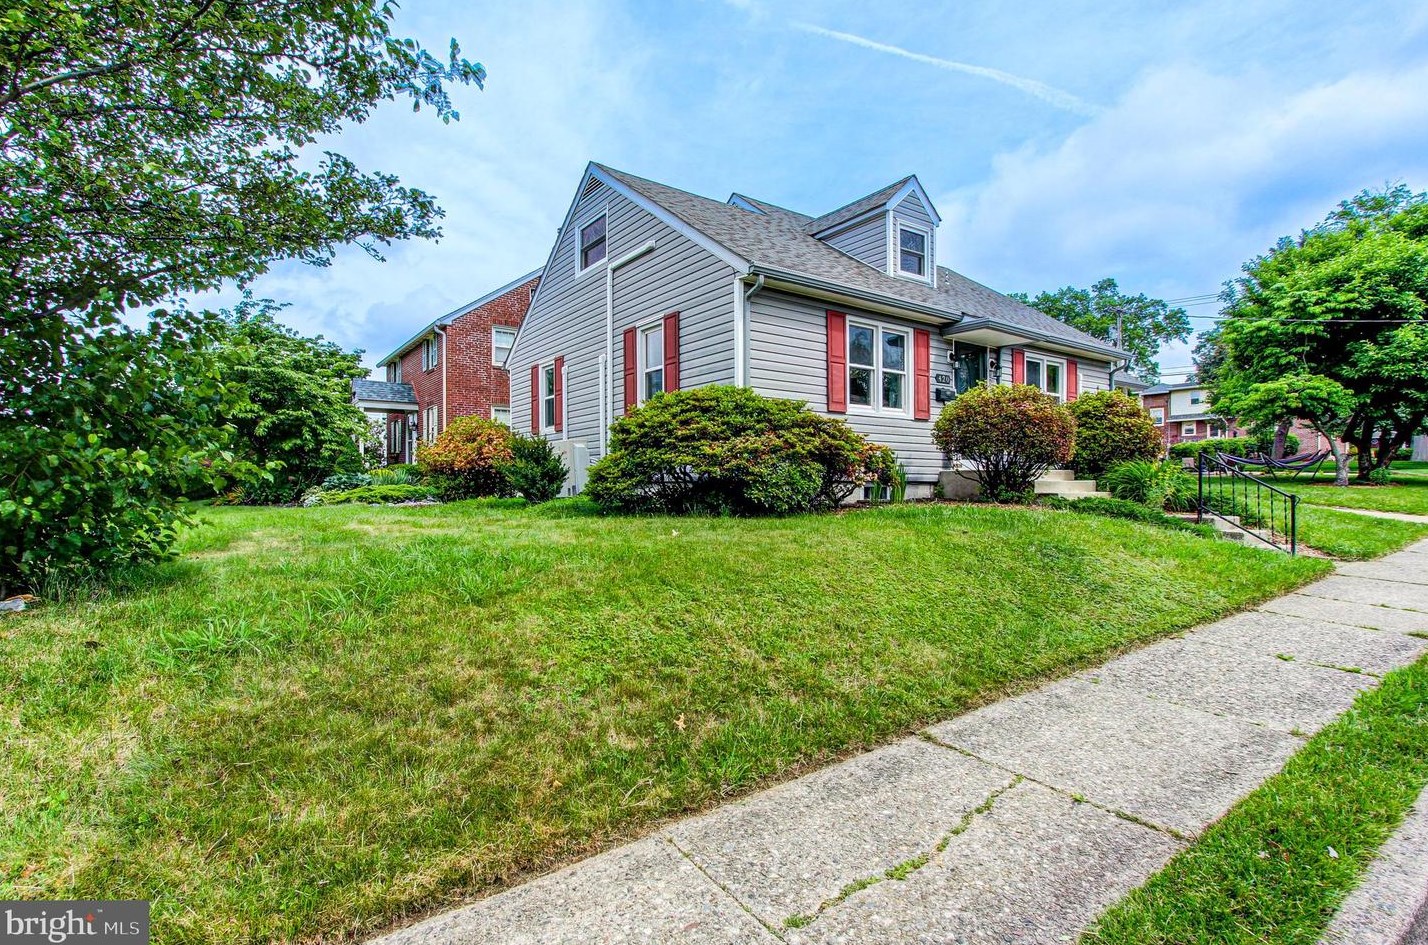 420 S Cannon Ave, Lansdale, PA 19446